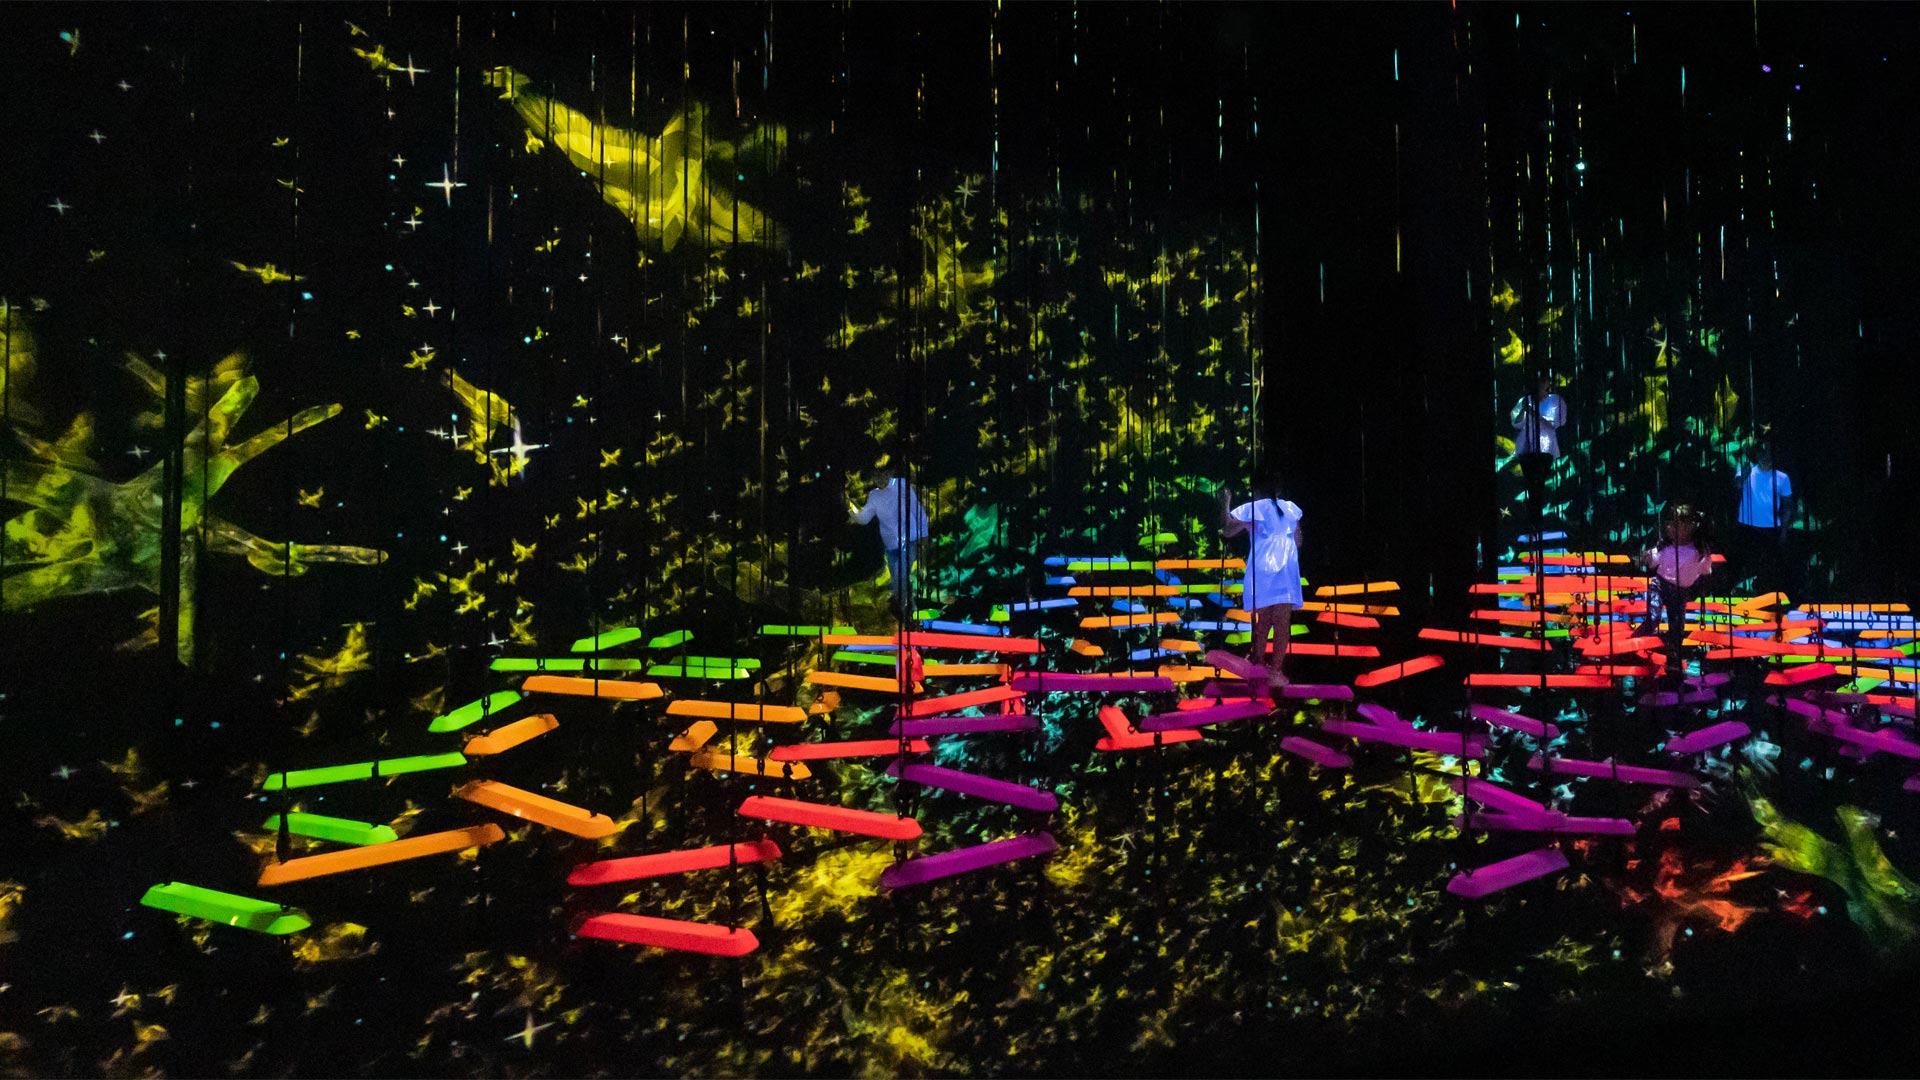 Immersive experience at ArtScience Museum in Singapore